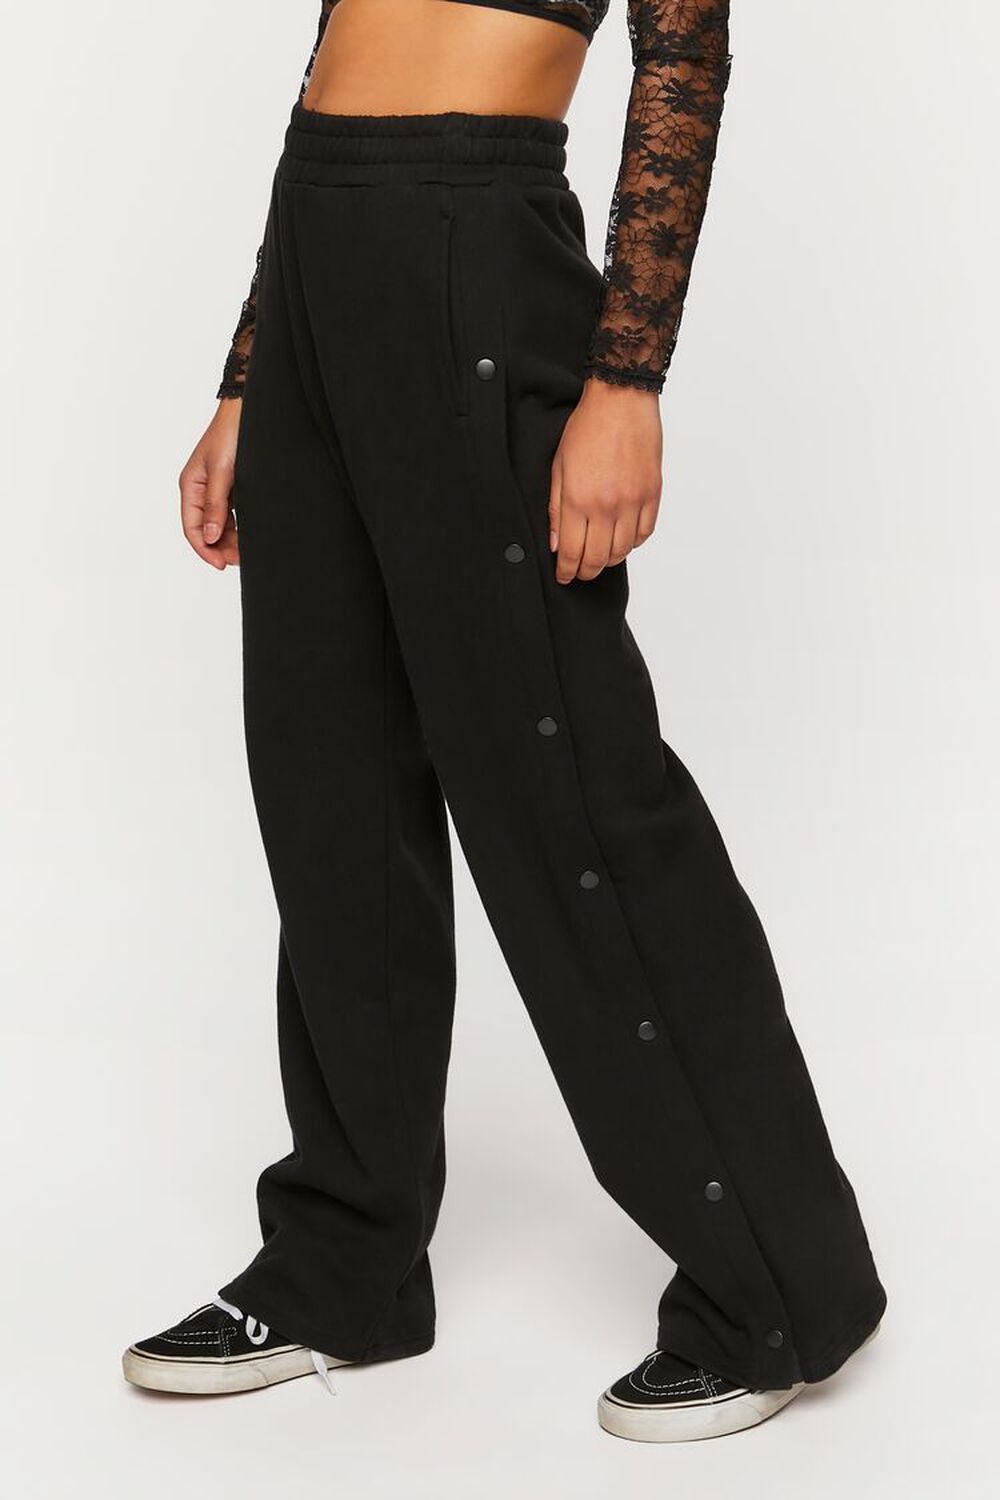 BLACK French Terry Tearaway Pants, image 3